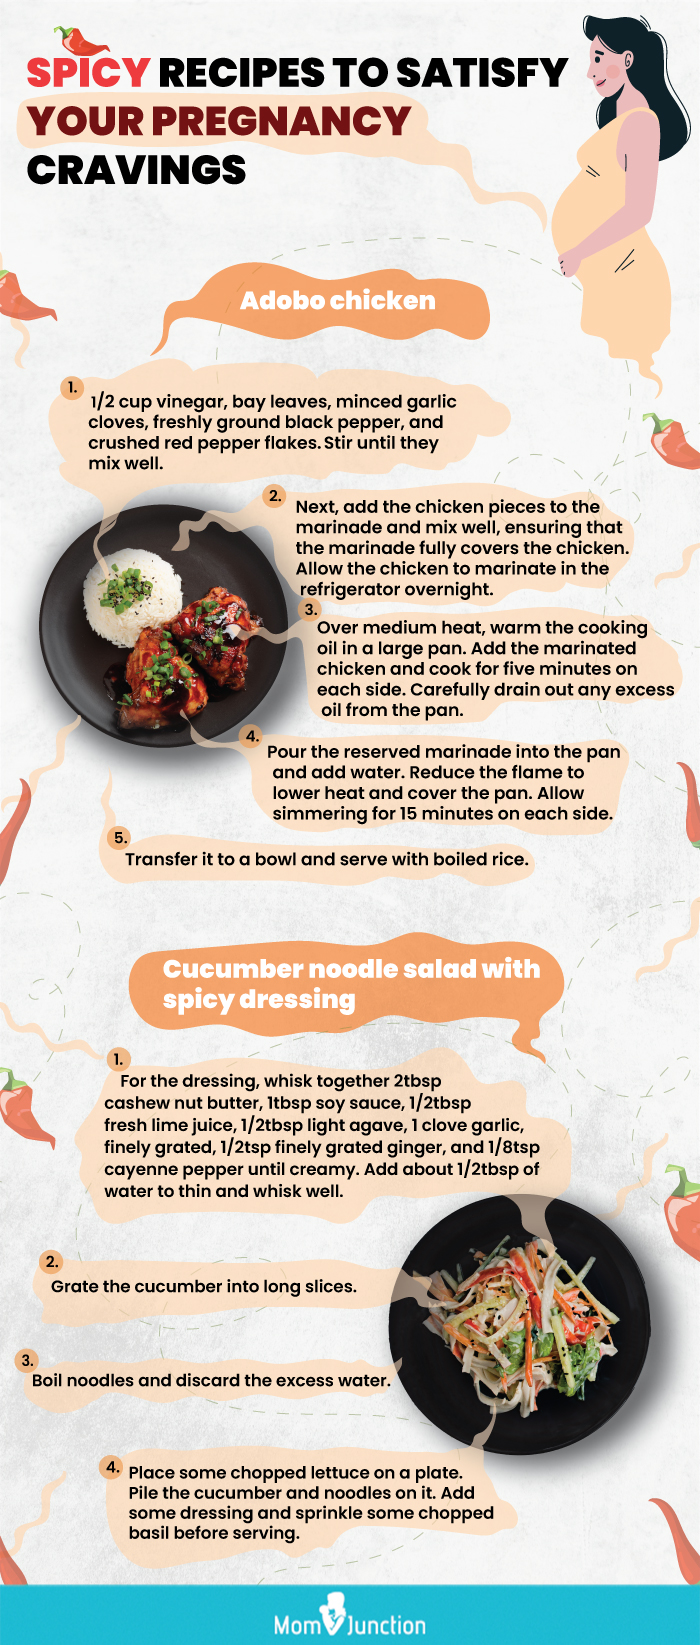 spicy recipes to satisfy your pregnancy cravings [infographic]